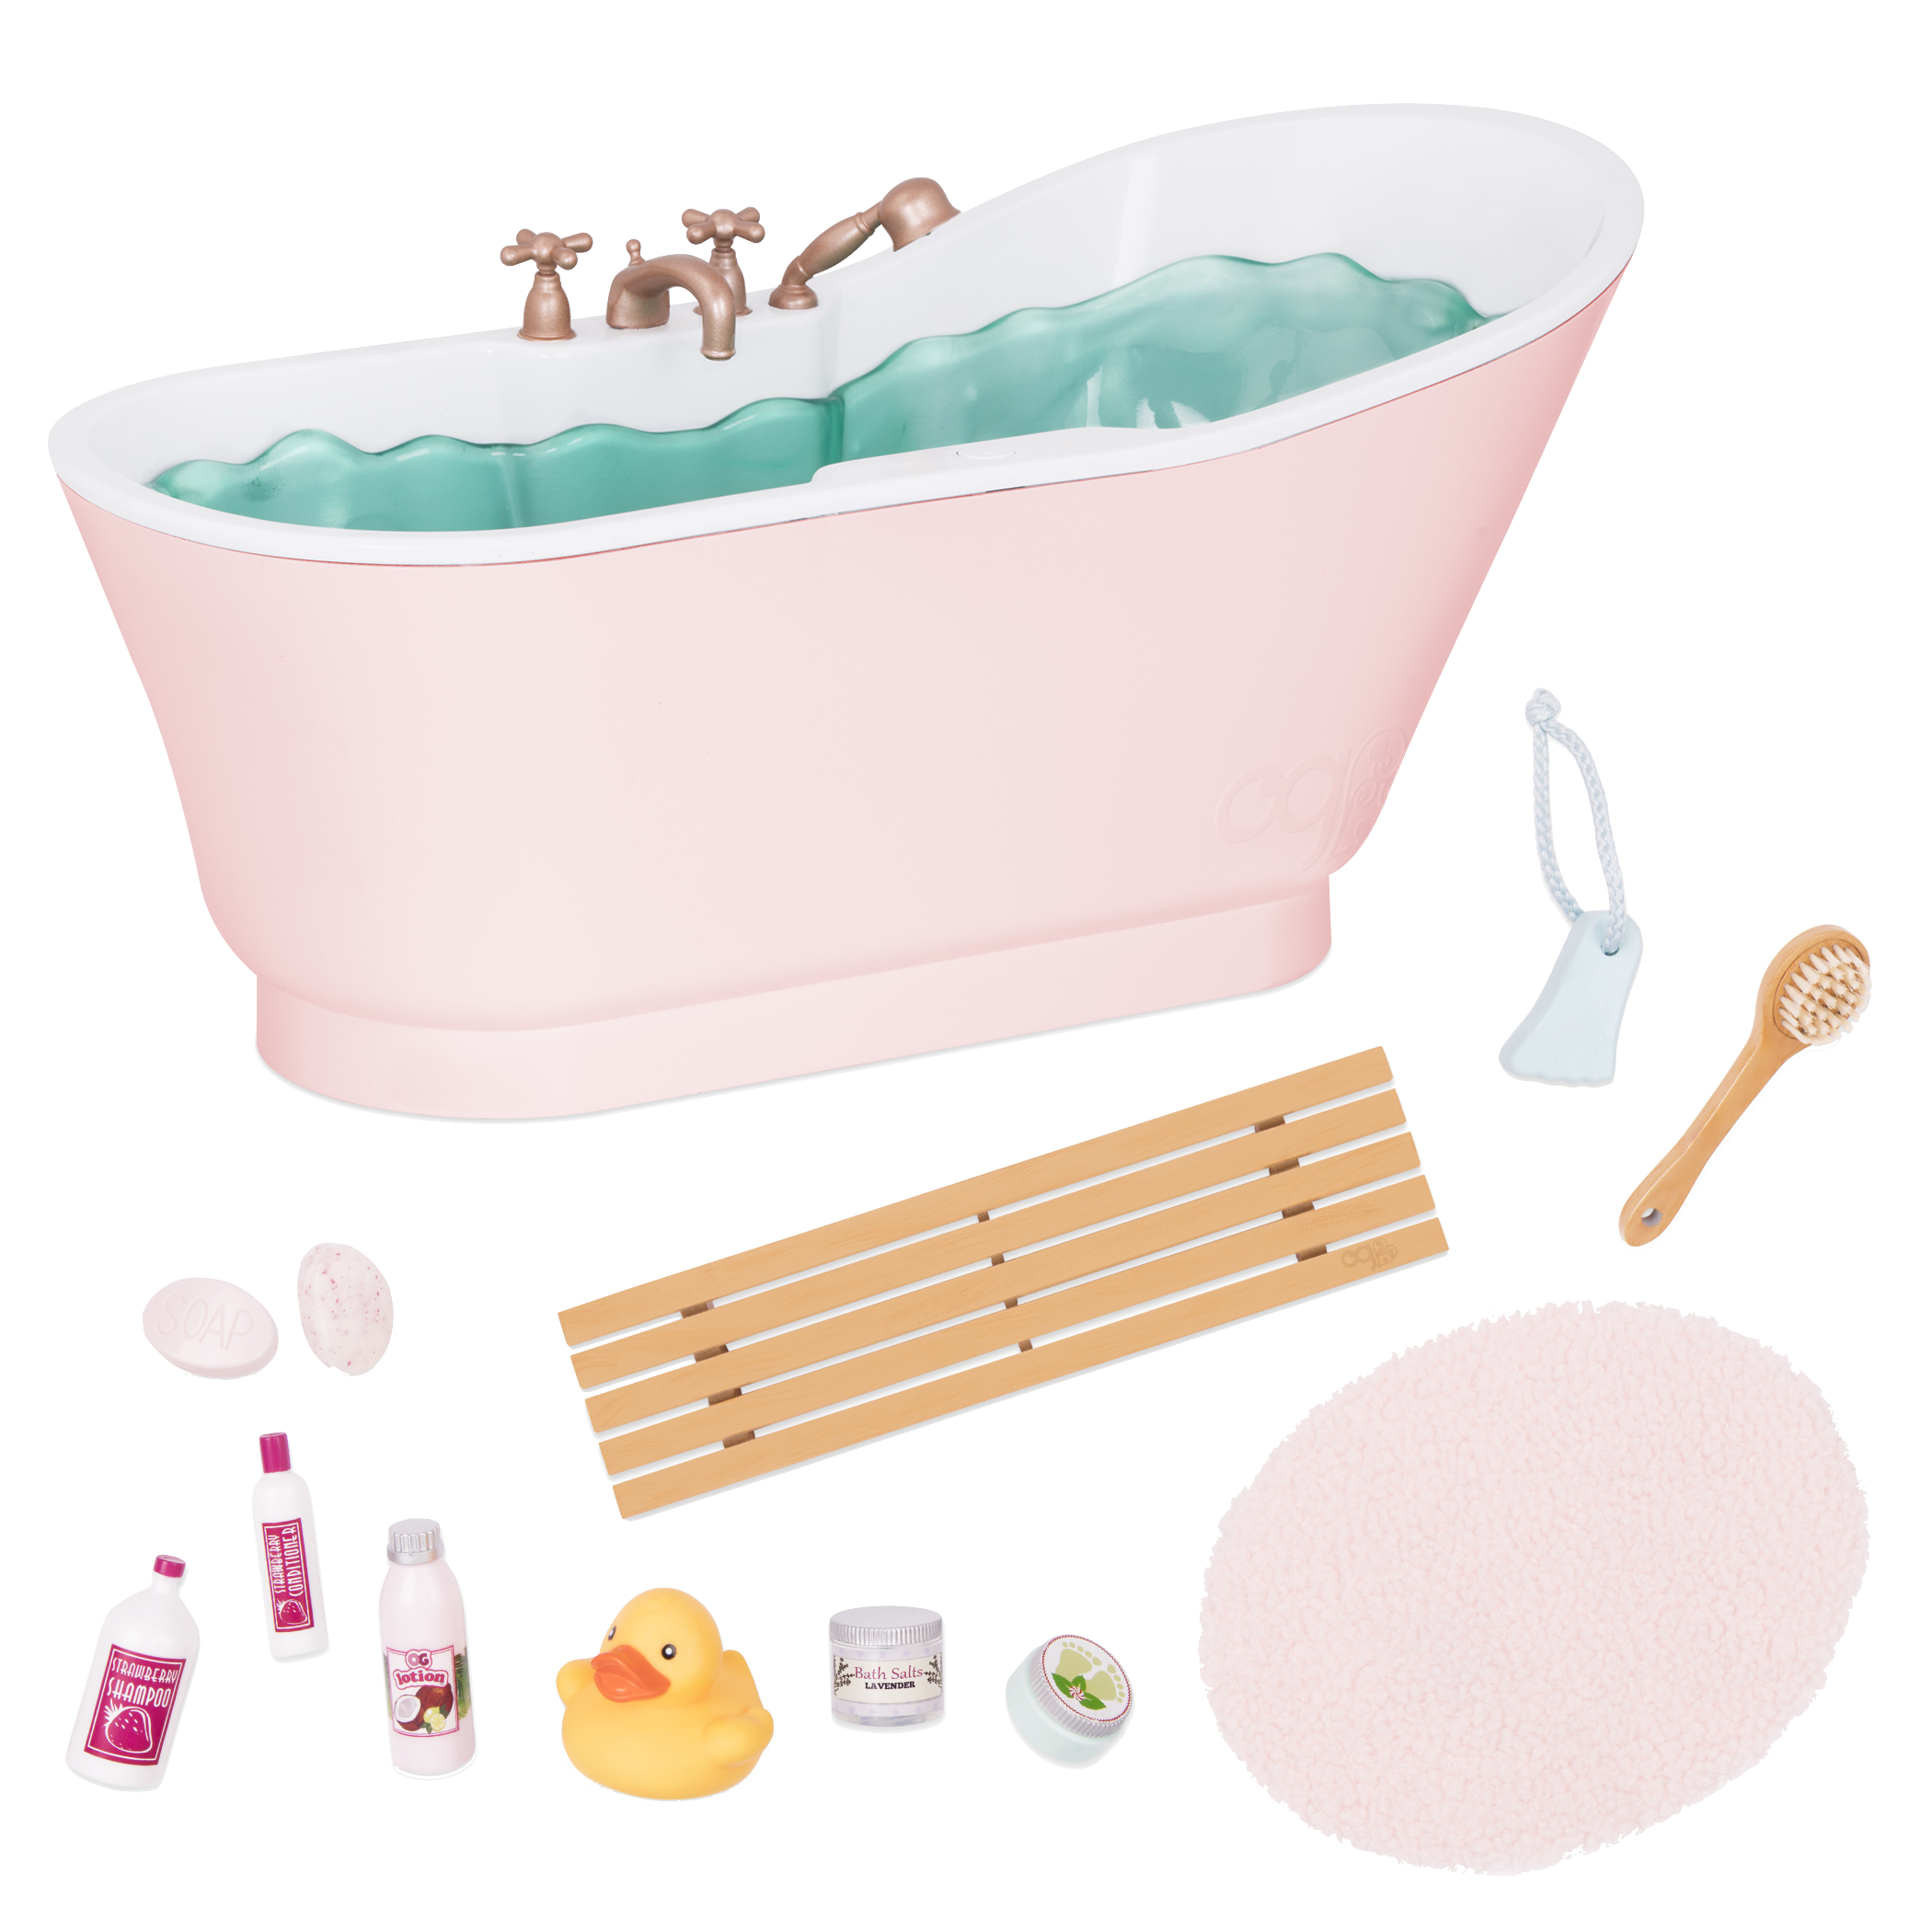 Bath and Bubbles set all items